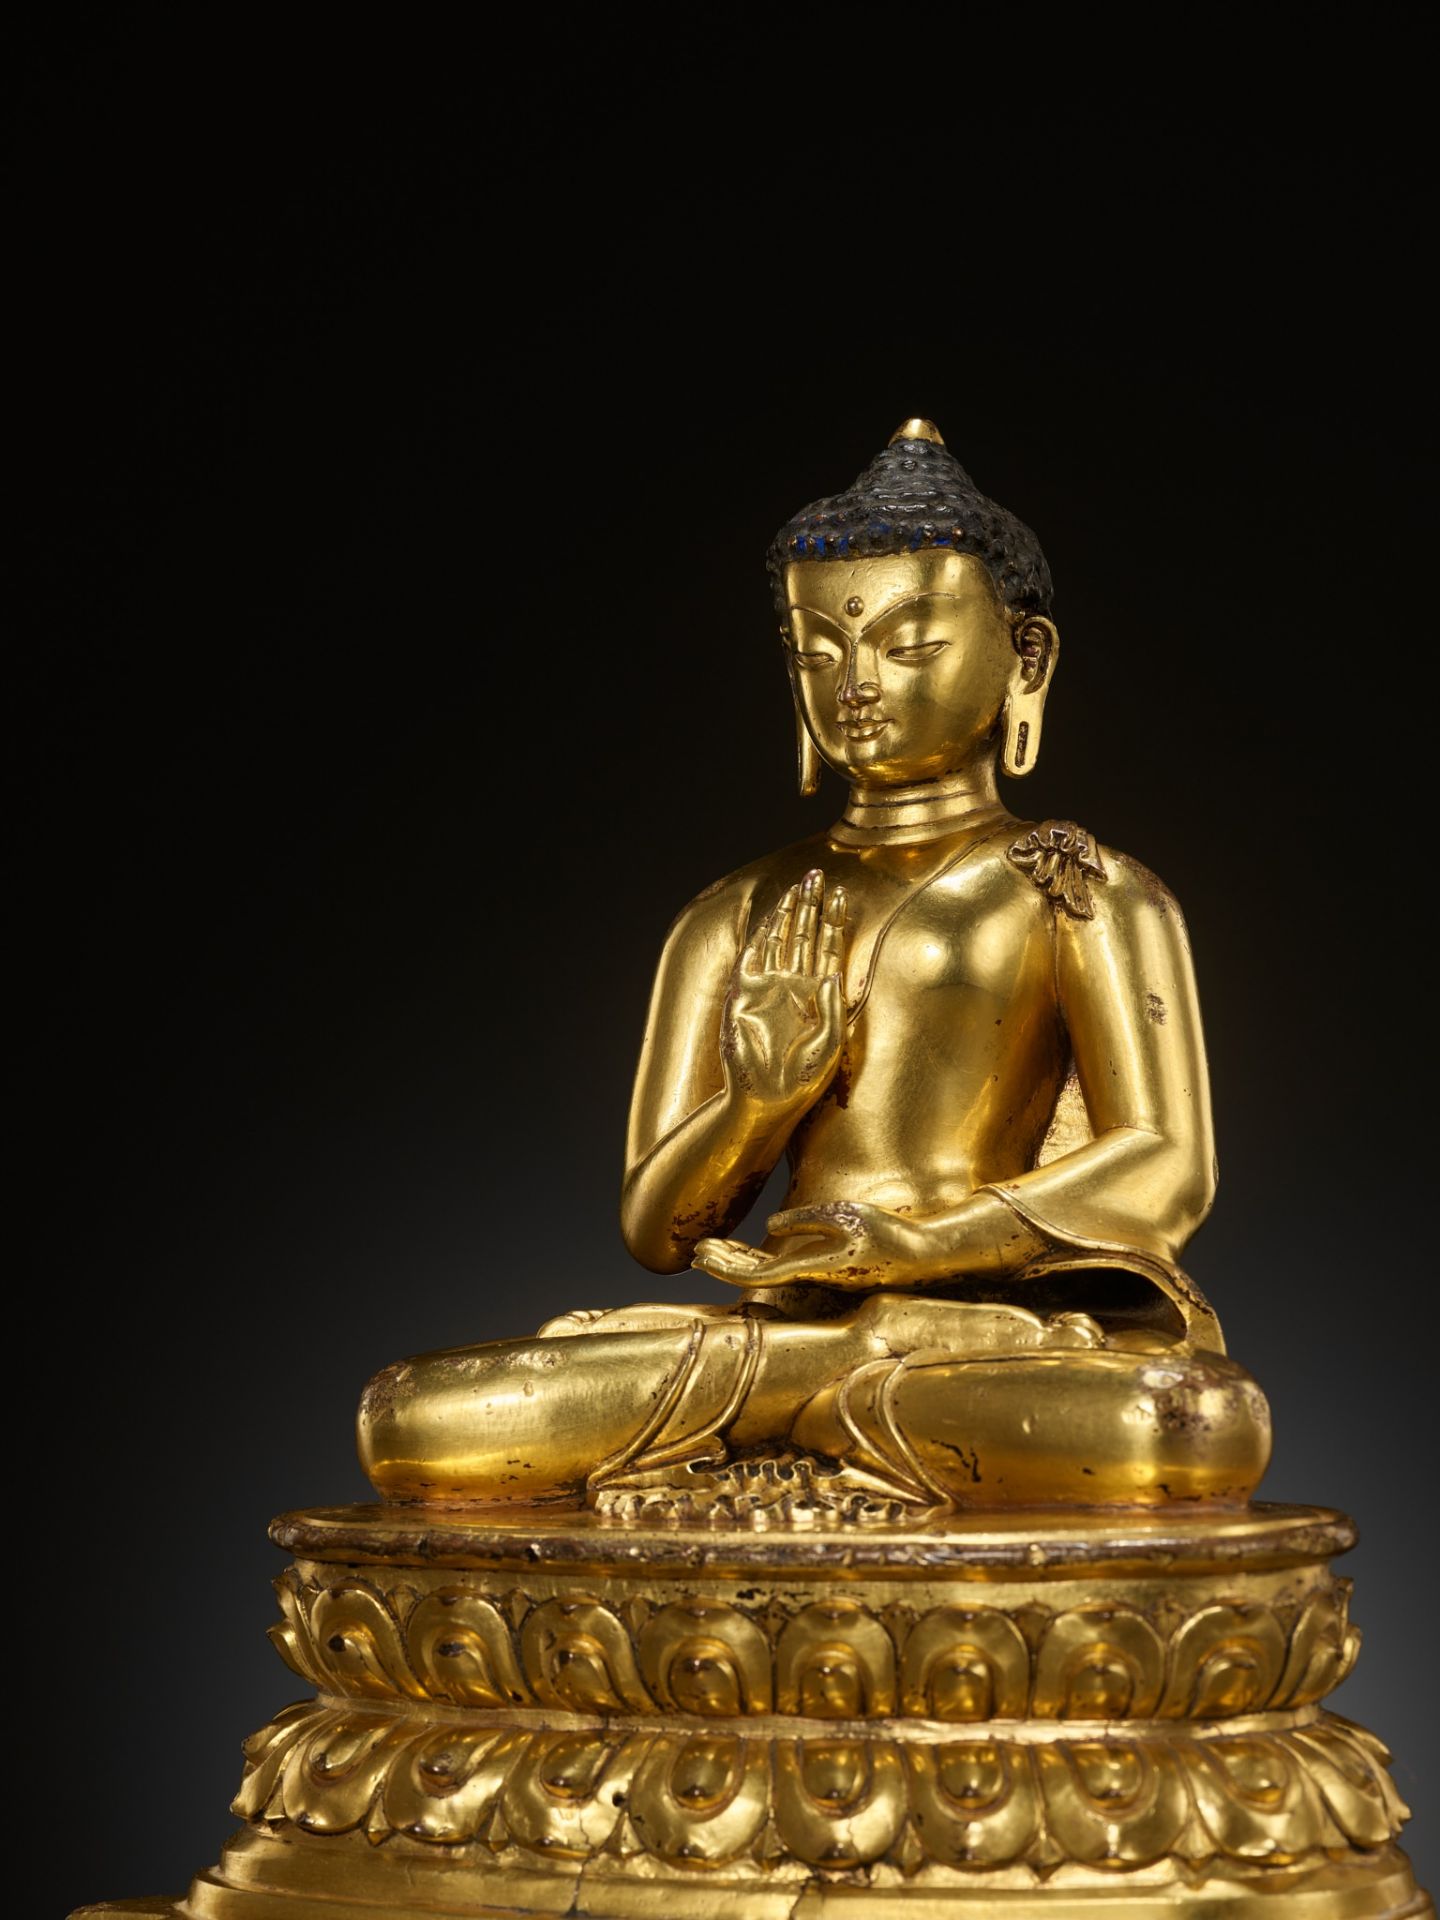 A GILT COPPER ALLOY FIGURE OF AMOGHASIDDHI, POSSIBLY DENSATIL, TIBET, 14TH-15TH CENTURY - Image 21 of 22